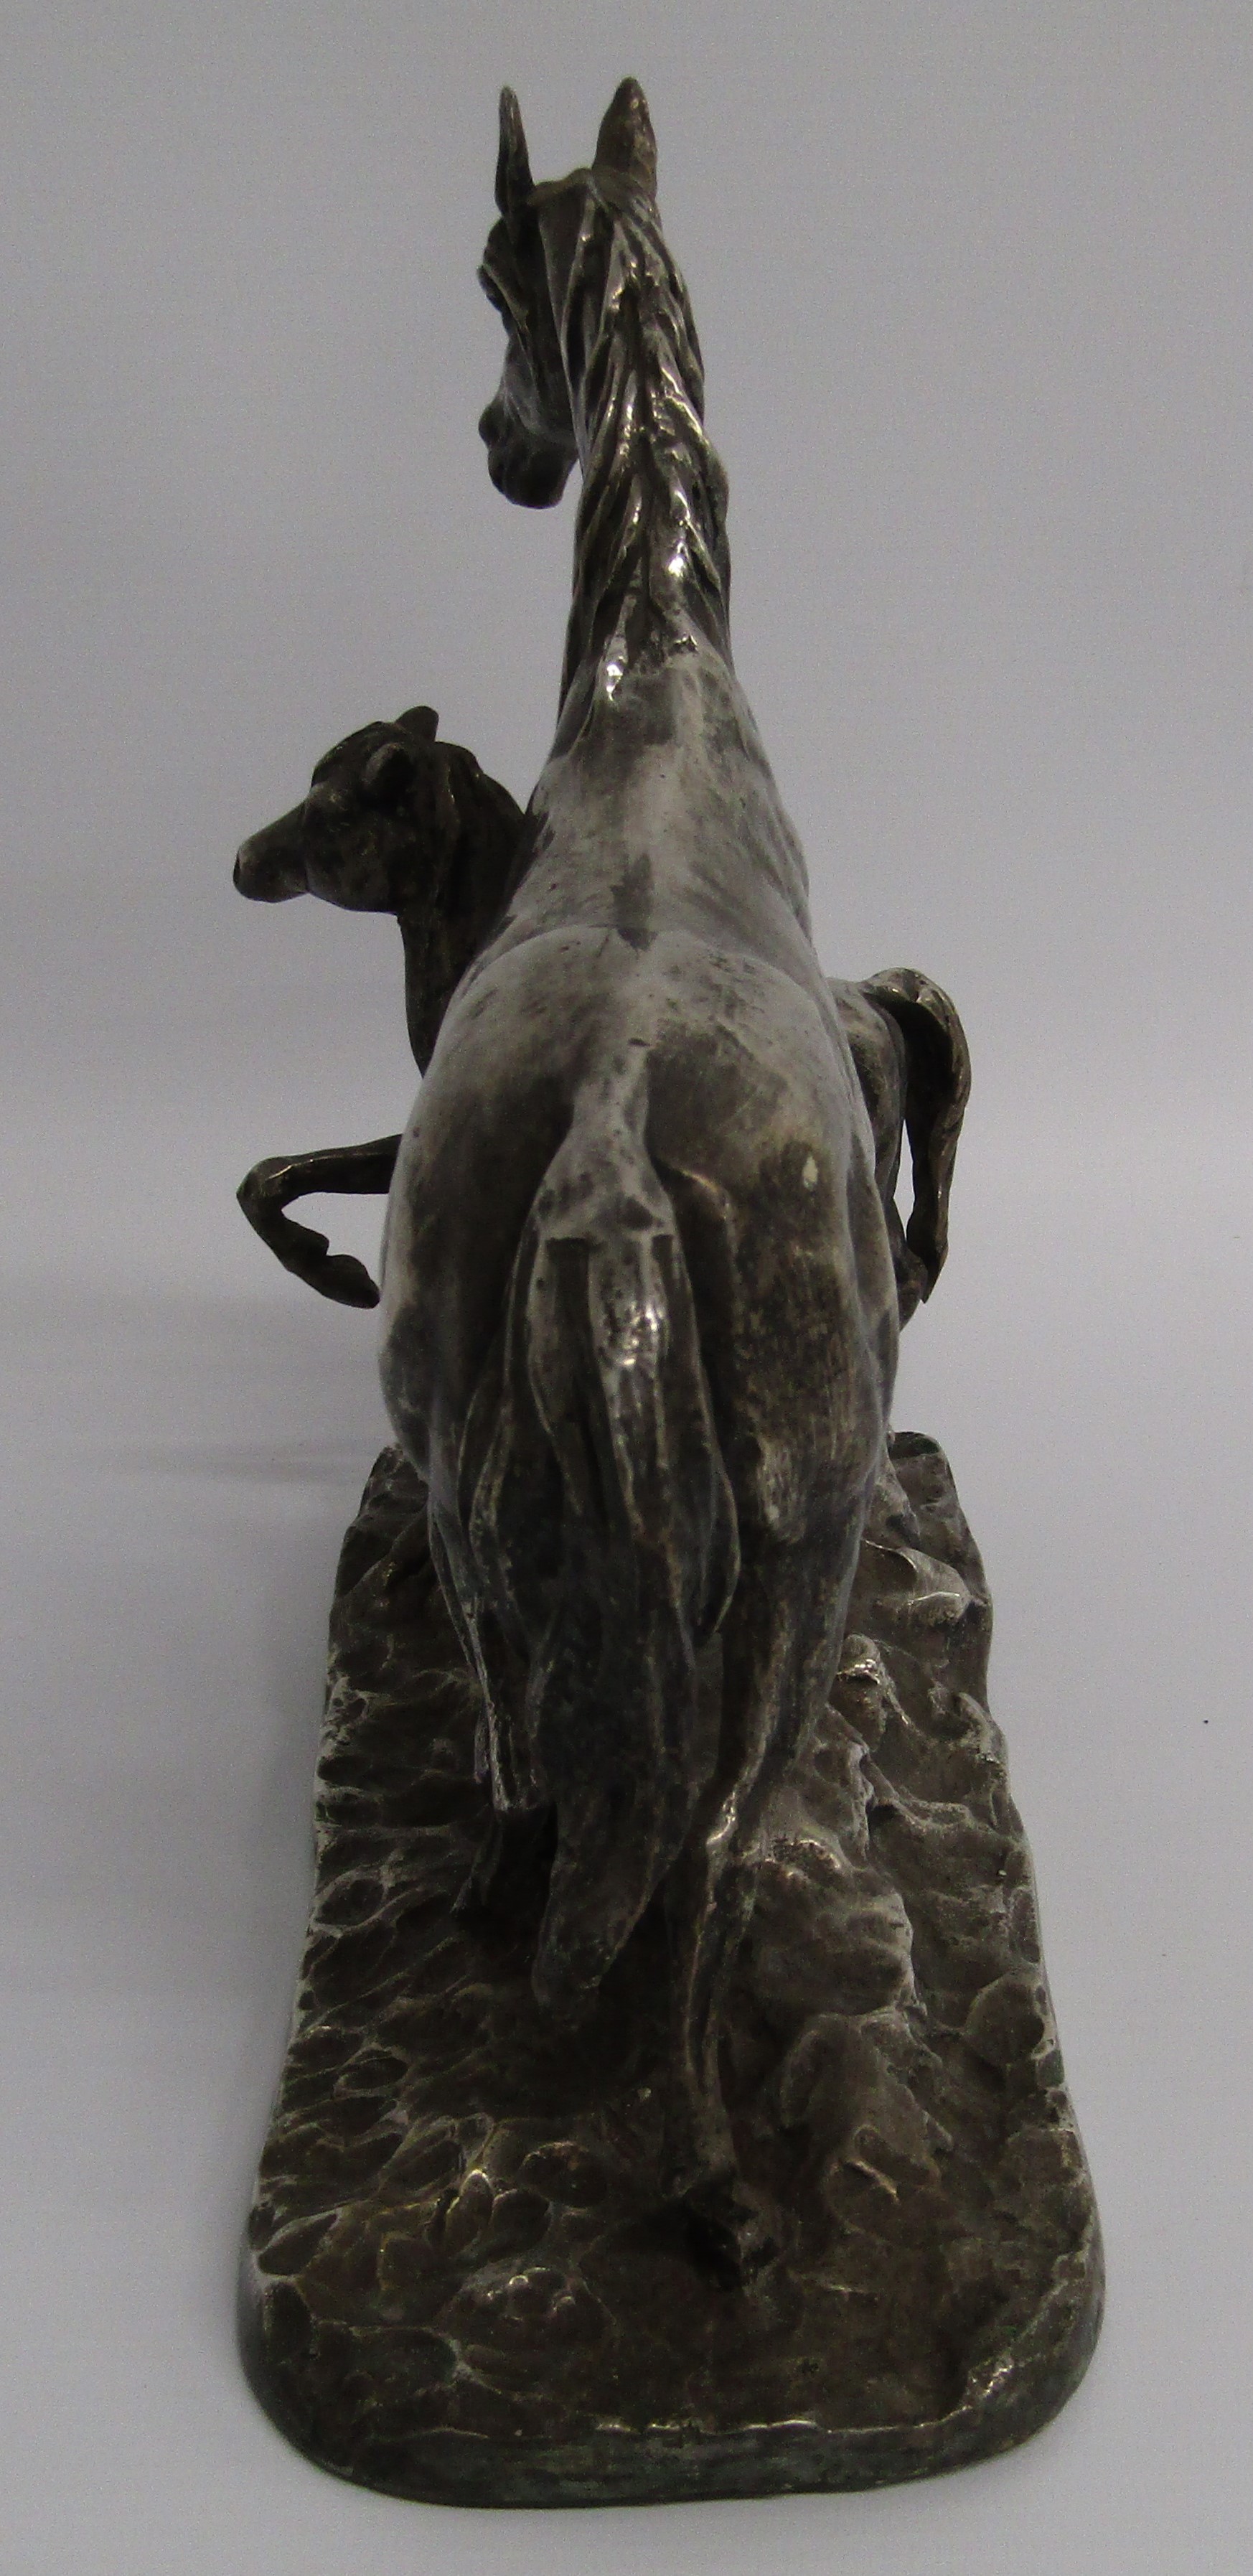 Horse and foal silver plated cast figurine - approx. 24cm x 21.5cm x 9cm - Image 2 of 5